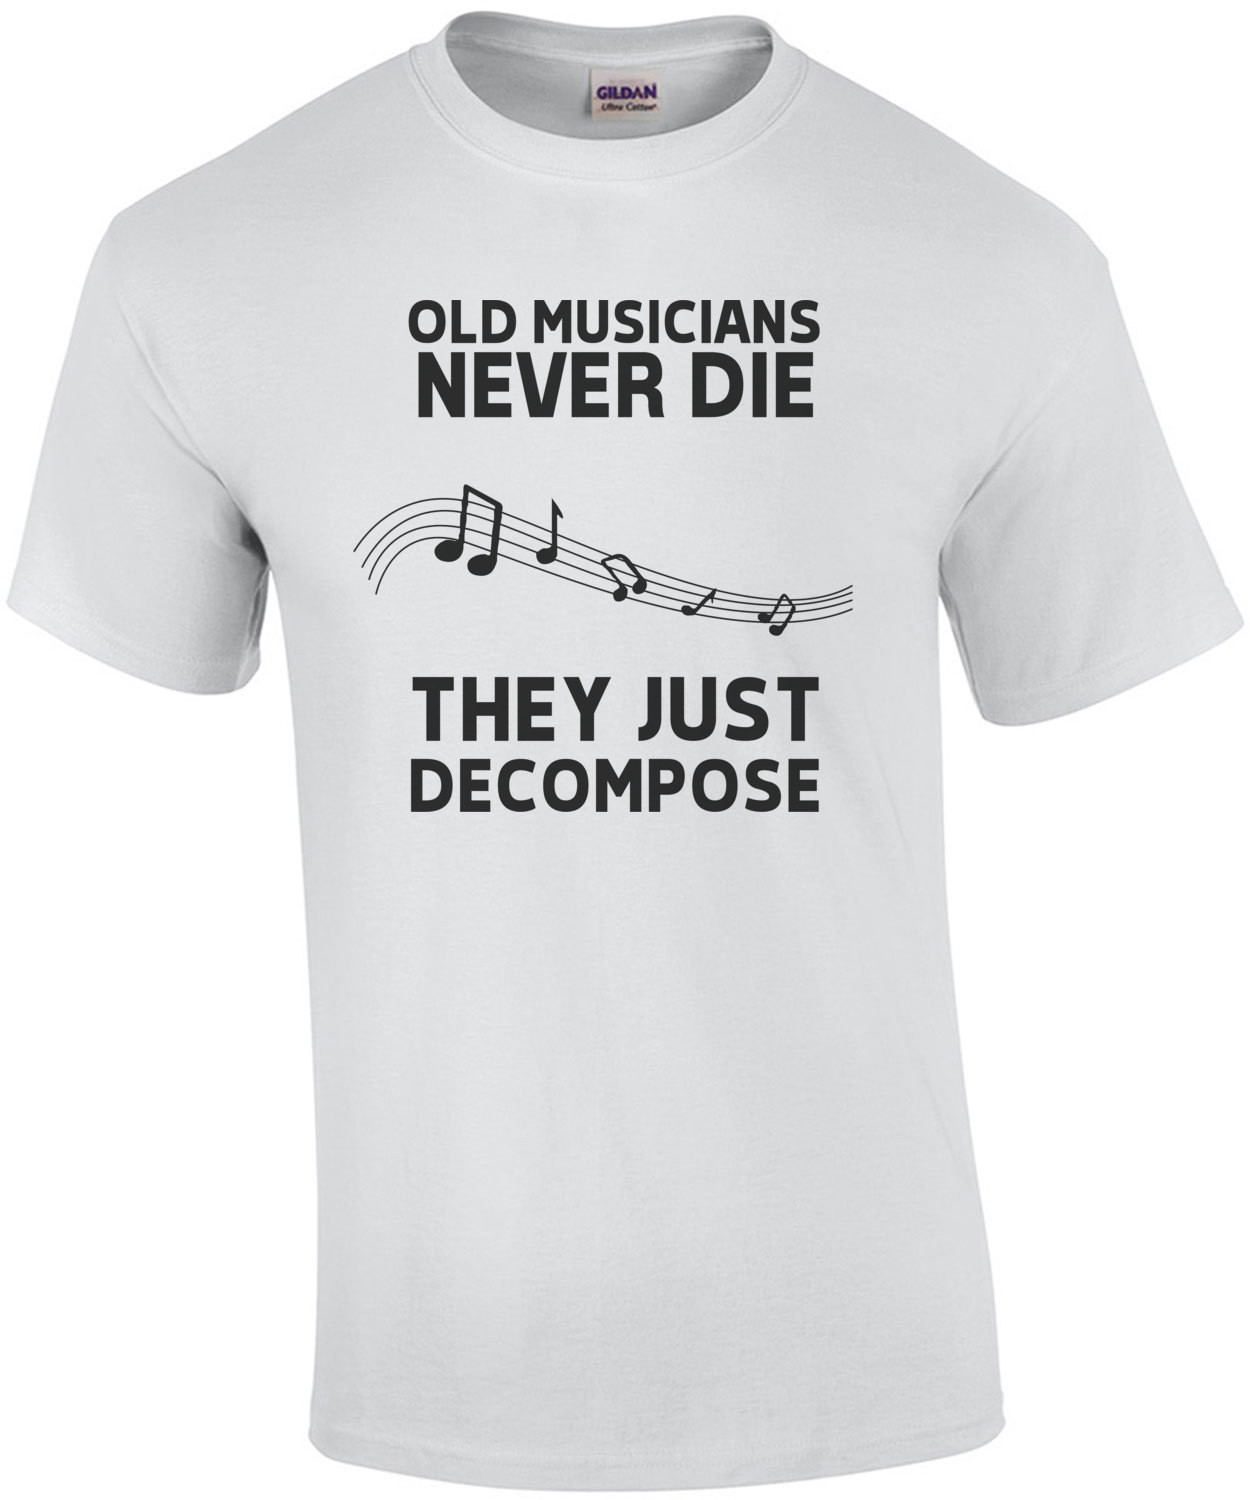 Old Musicians never die they just decompose - funny musician t-shirt